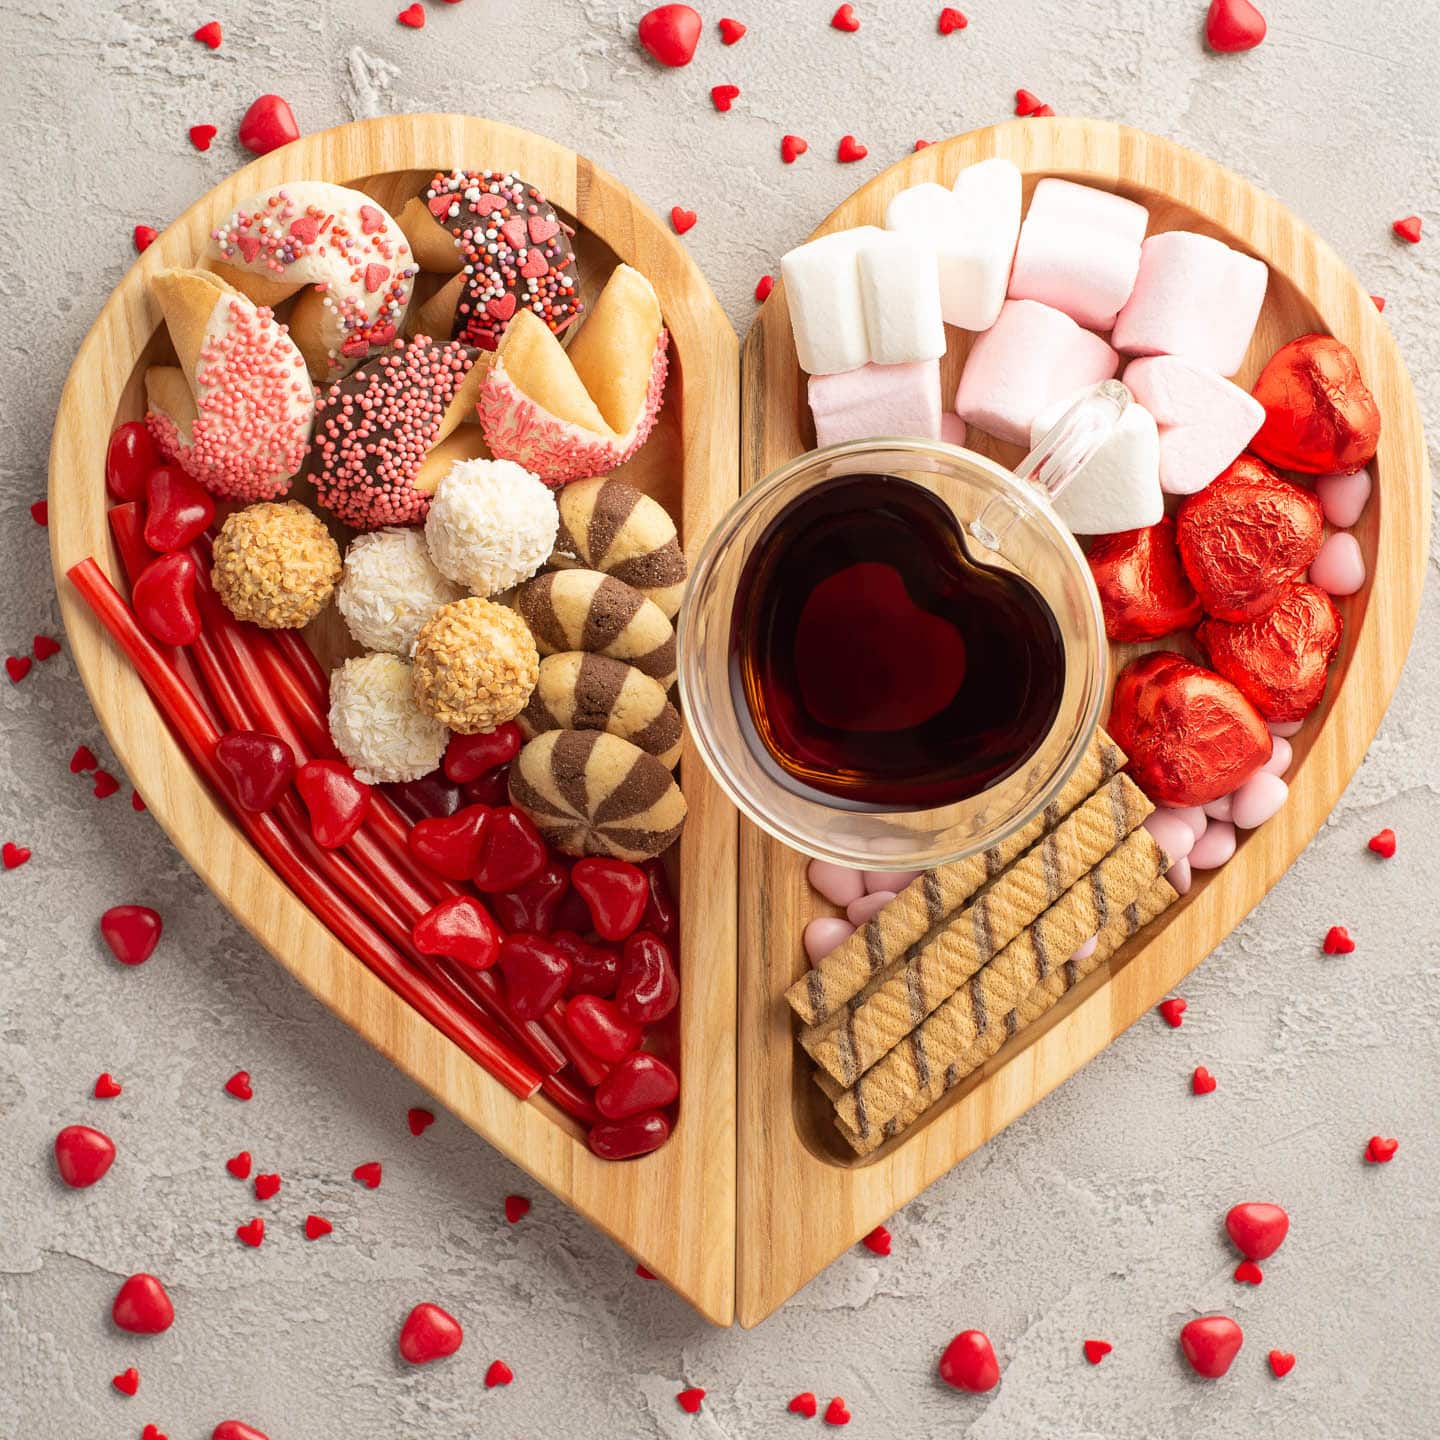 Heart-shaped Valentine charcuterie board with various pink and red candies as well as cookies